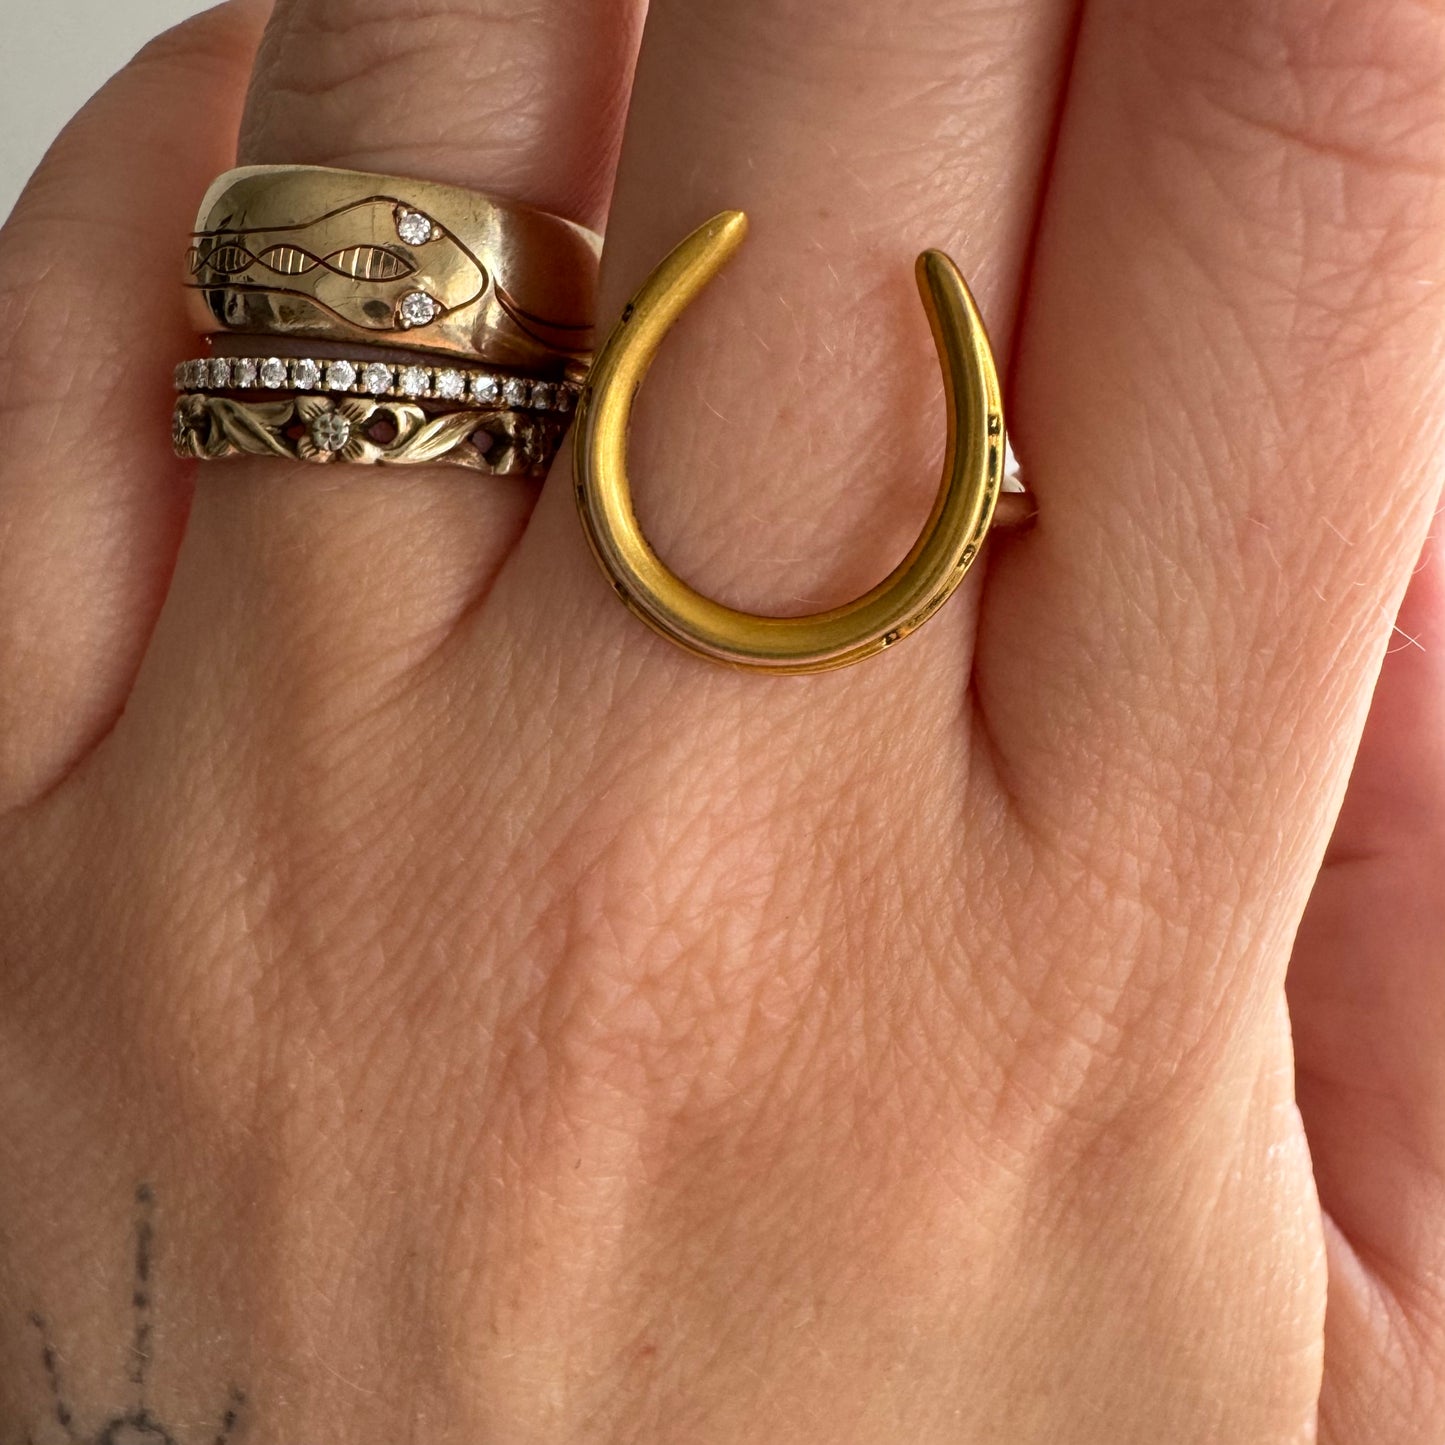 reimagined A N T I Q U E // timeless luck / 10k yellow gold horseshoe conversion ring / size 7.25